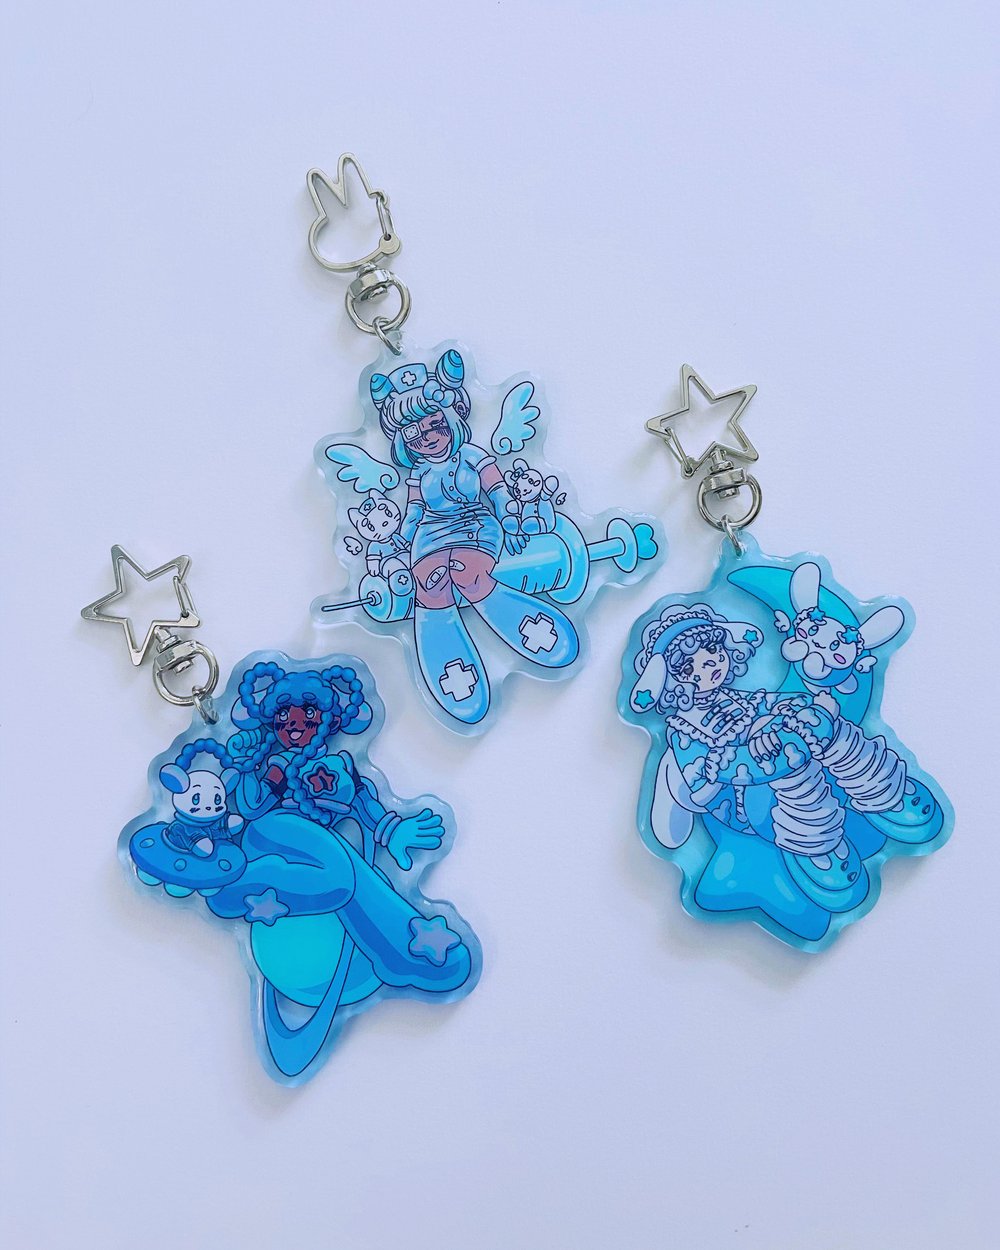 Image of cuties keychains